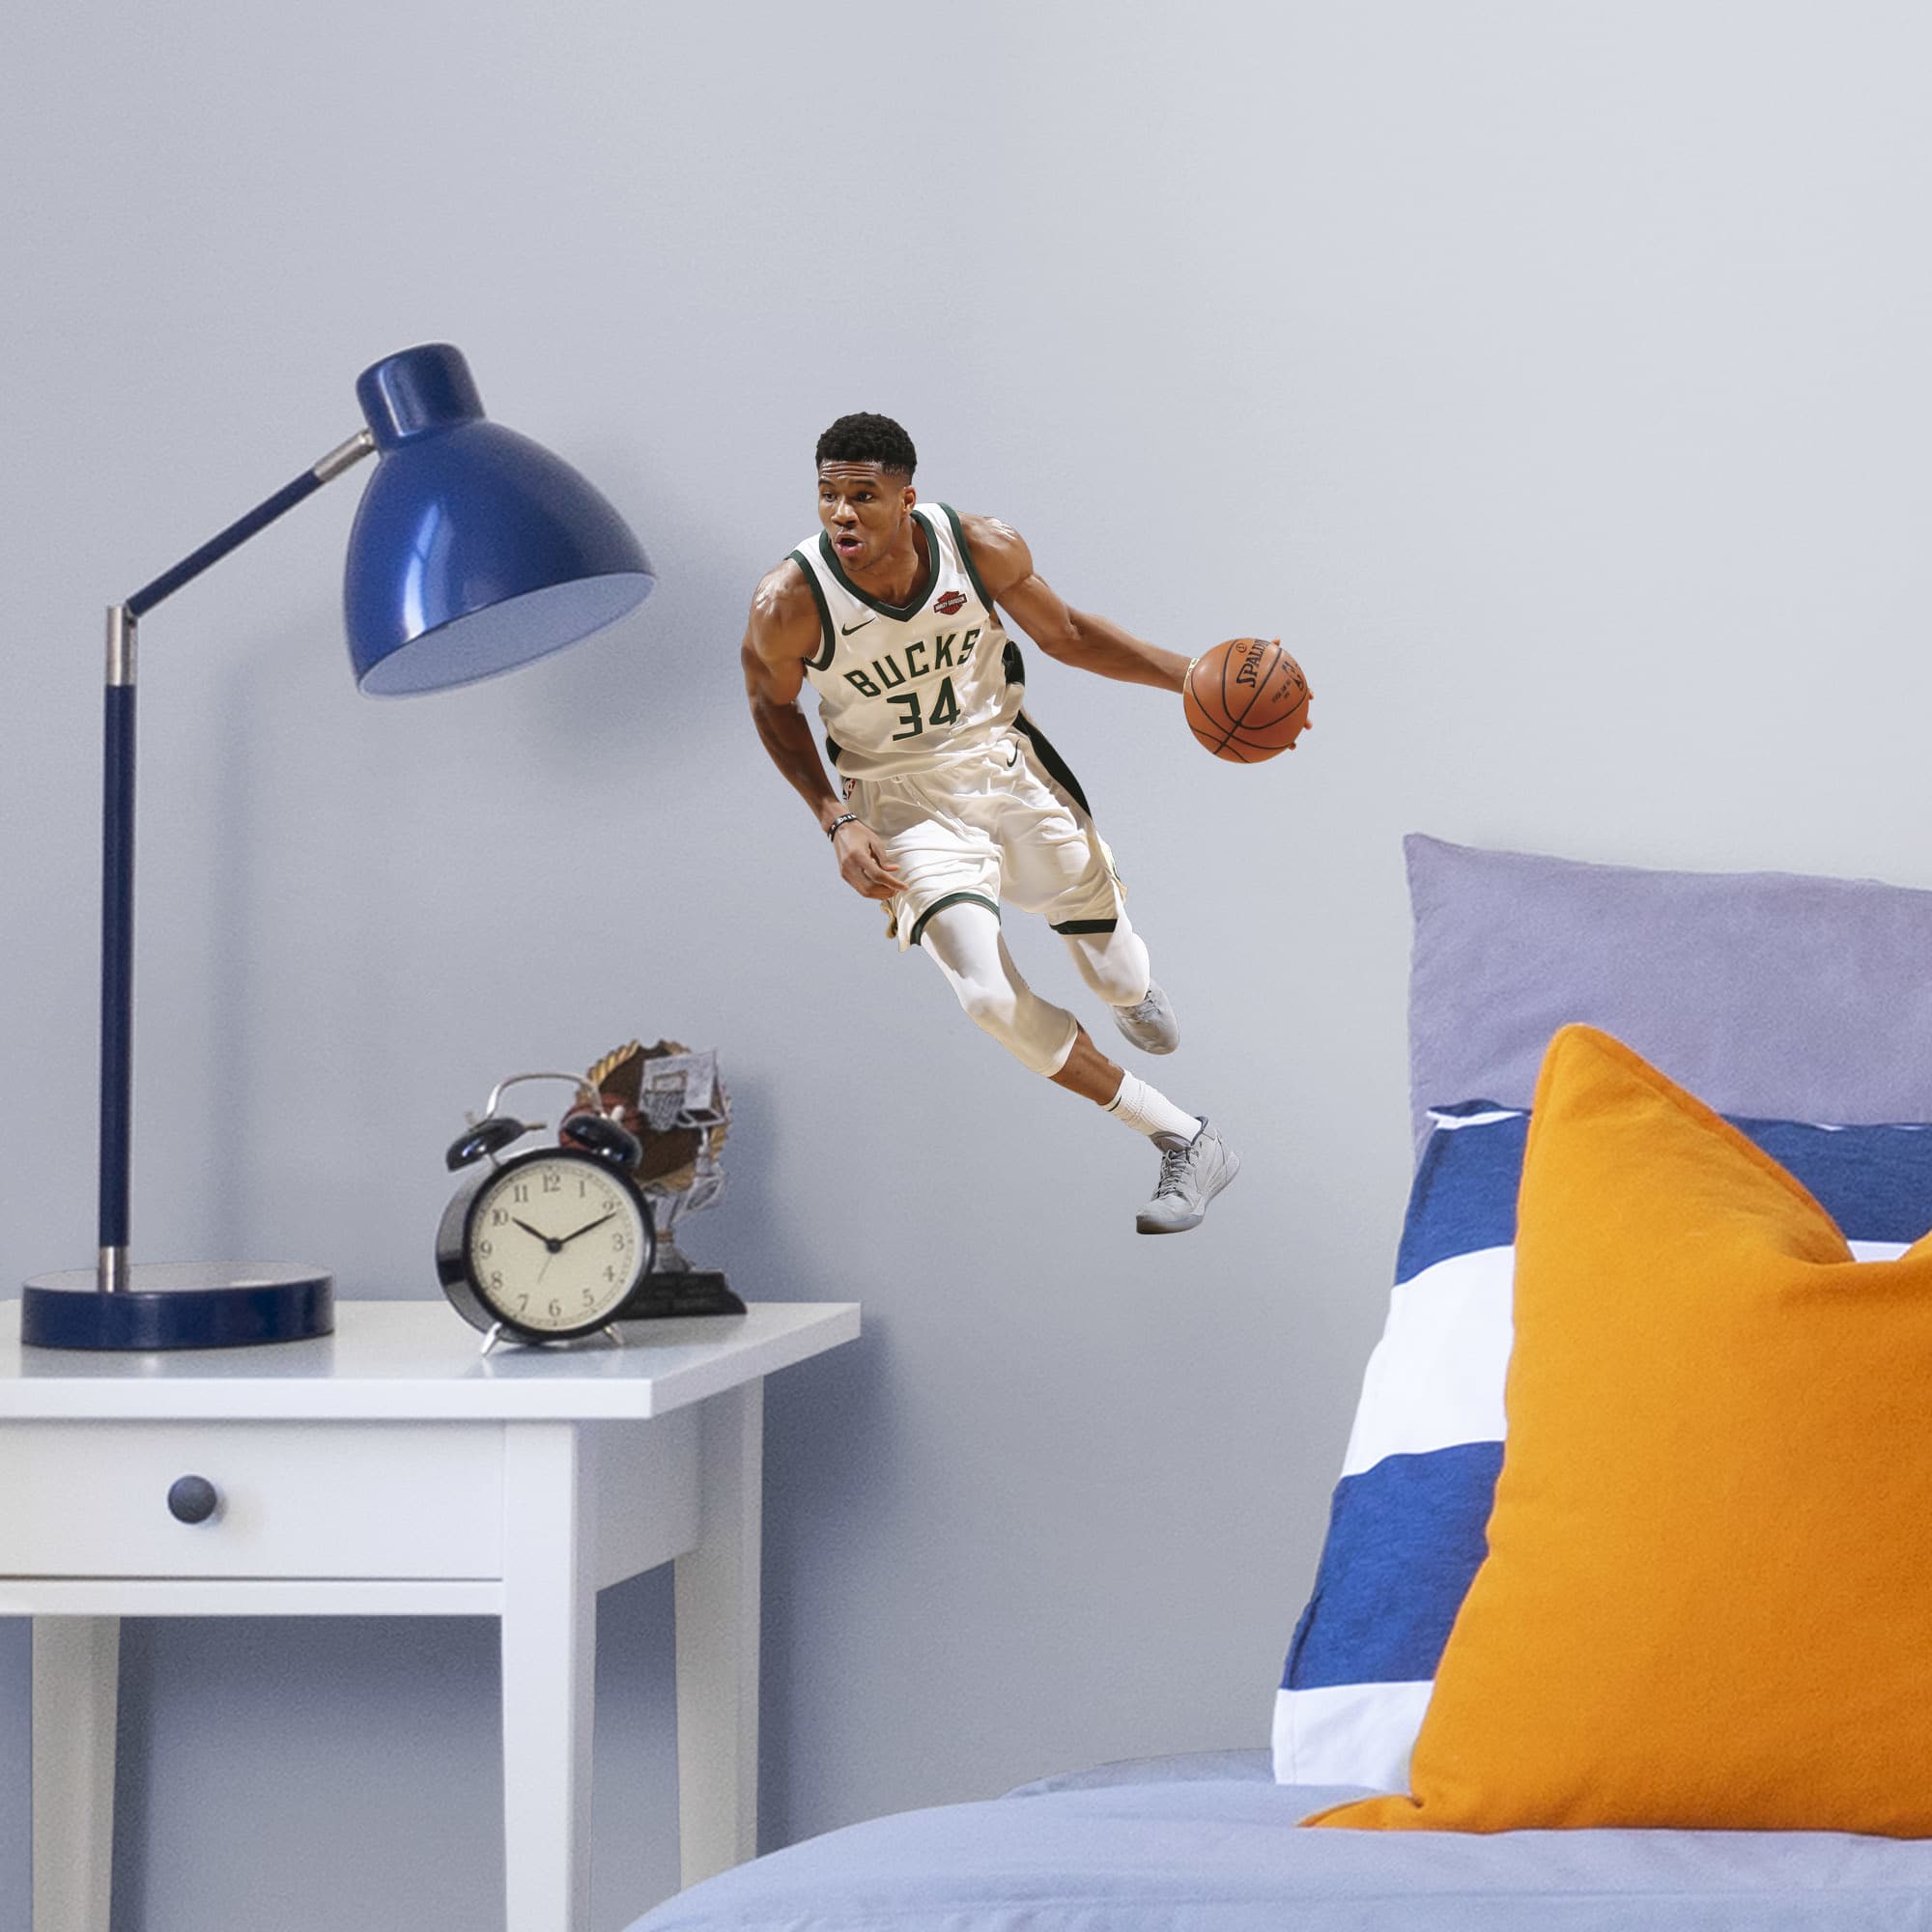 Giannis Antetokounmpo for Milwaukee Bucks - Officially Licensed NBA Removable Wall Decal Large by Fathead | Vinyl